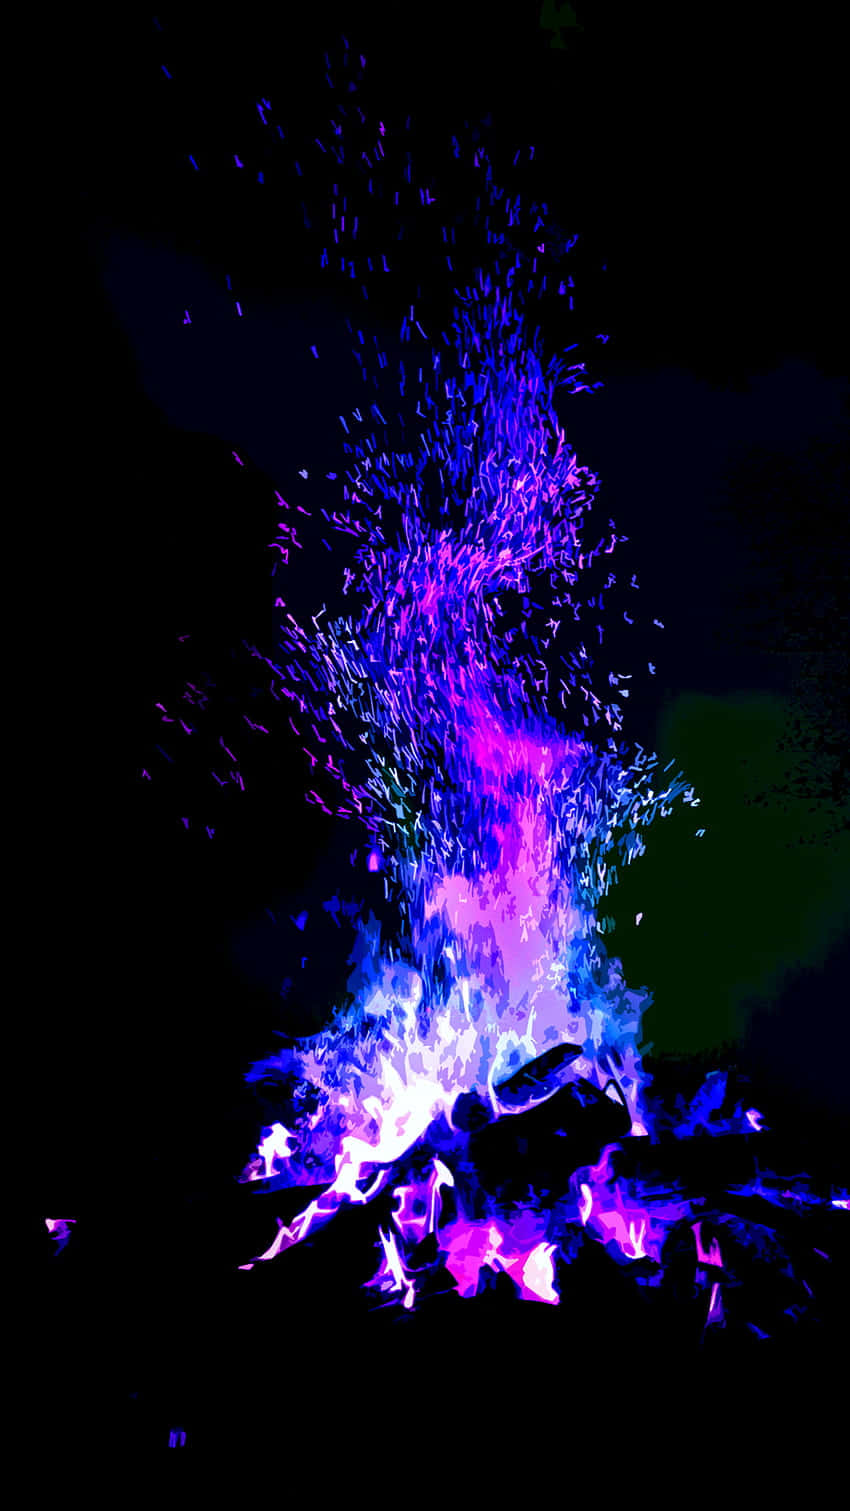 Electric Blue Flame Explosion Wallpaper